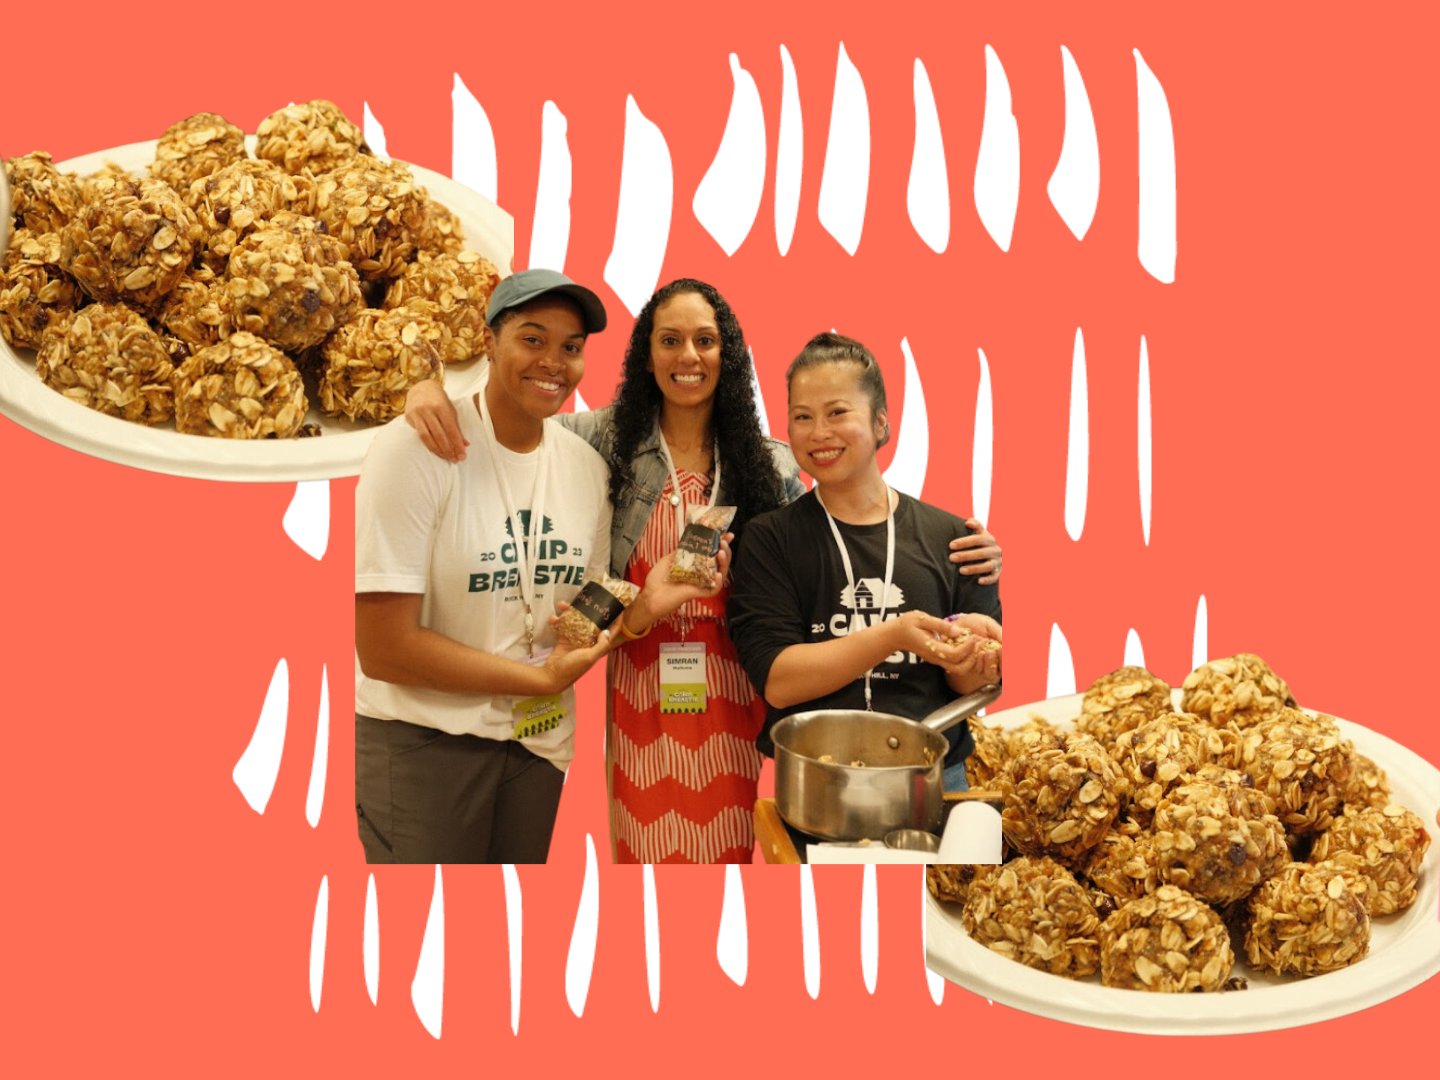 Dr. Simran smiles with Breasties who are busy making her no-bake plant powered bites. Plates show the no-bake oat-based balls